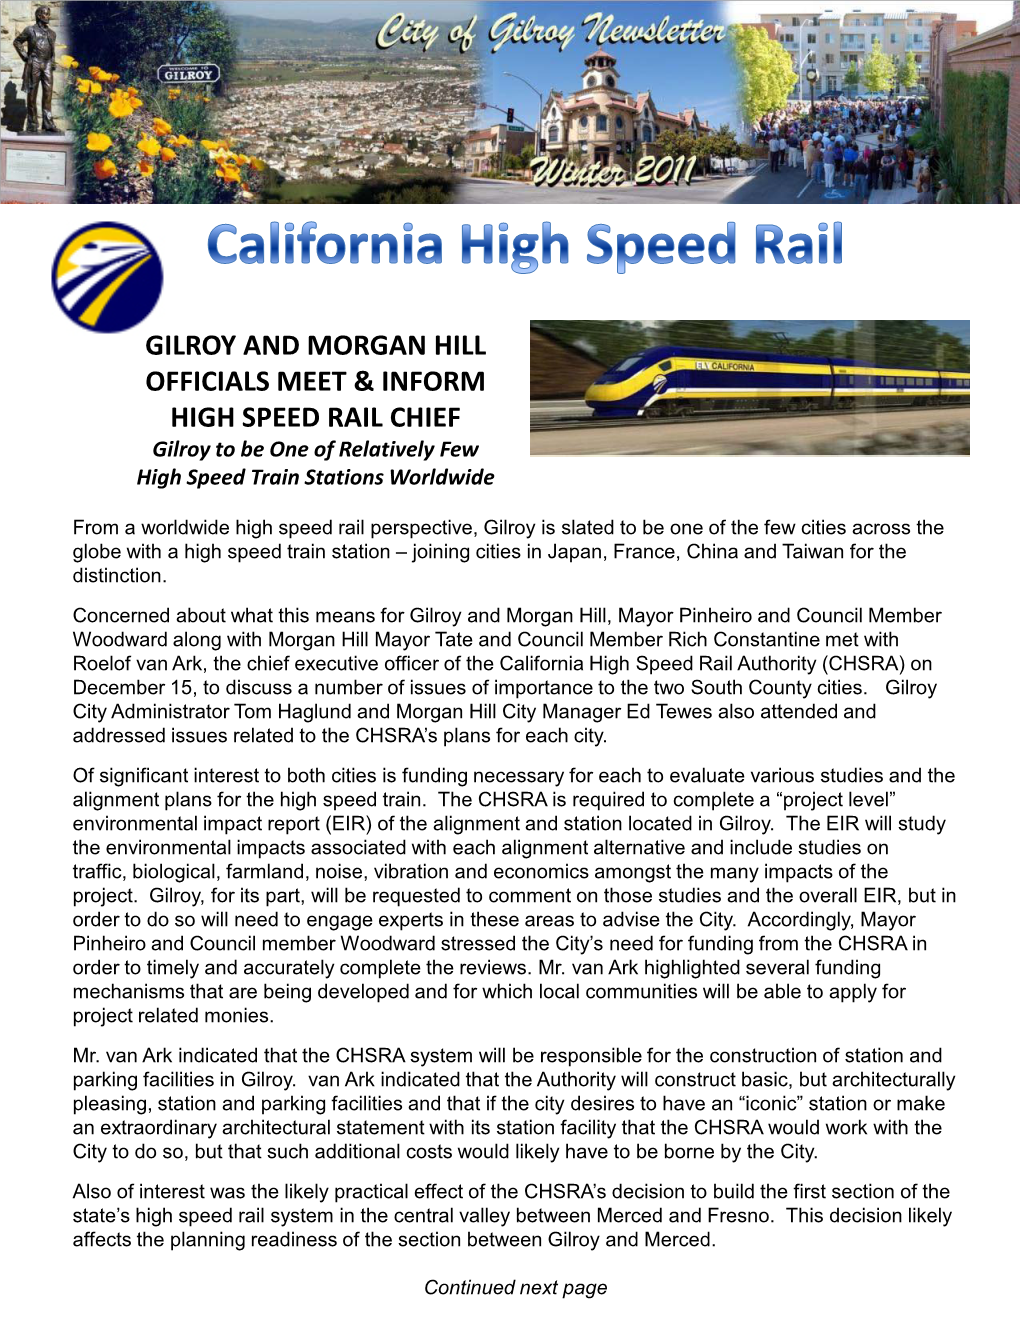 GILROY and MORGAN HILL OFFICIALS MEET & INFORM HIGH SPEED RAIL CHIEF Gilroy to Be One of Relatively Few High Speed Train Stations Worldwide